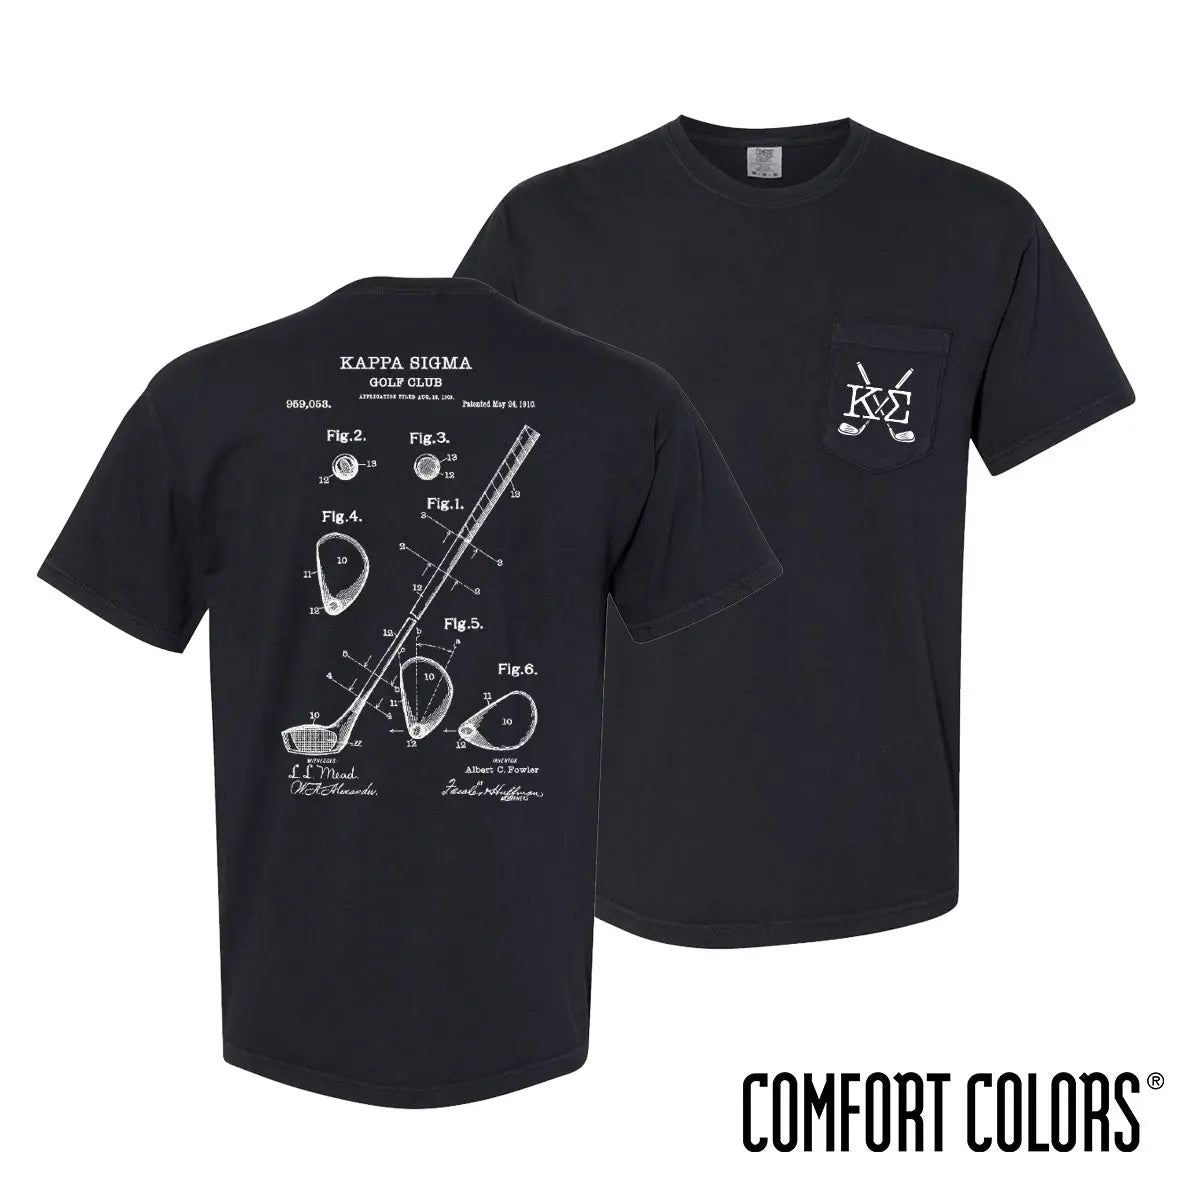 New! Kappa Sig Comfort Colors Club Components Short Sleeve Tee - Kappa Sigma Official Store